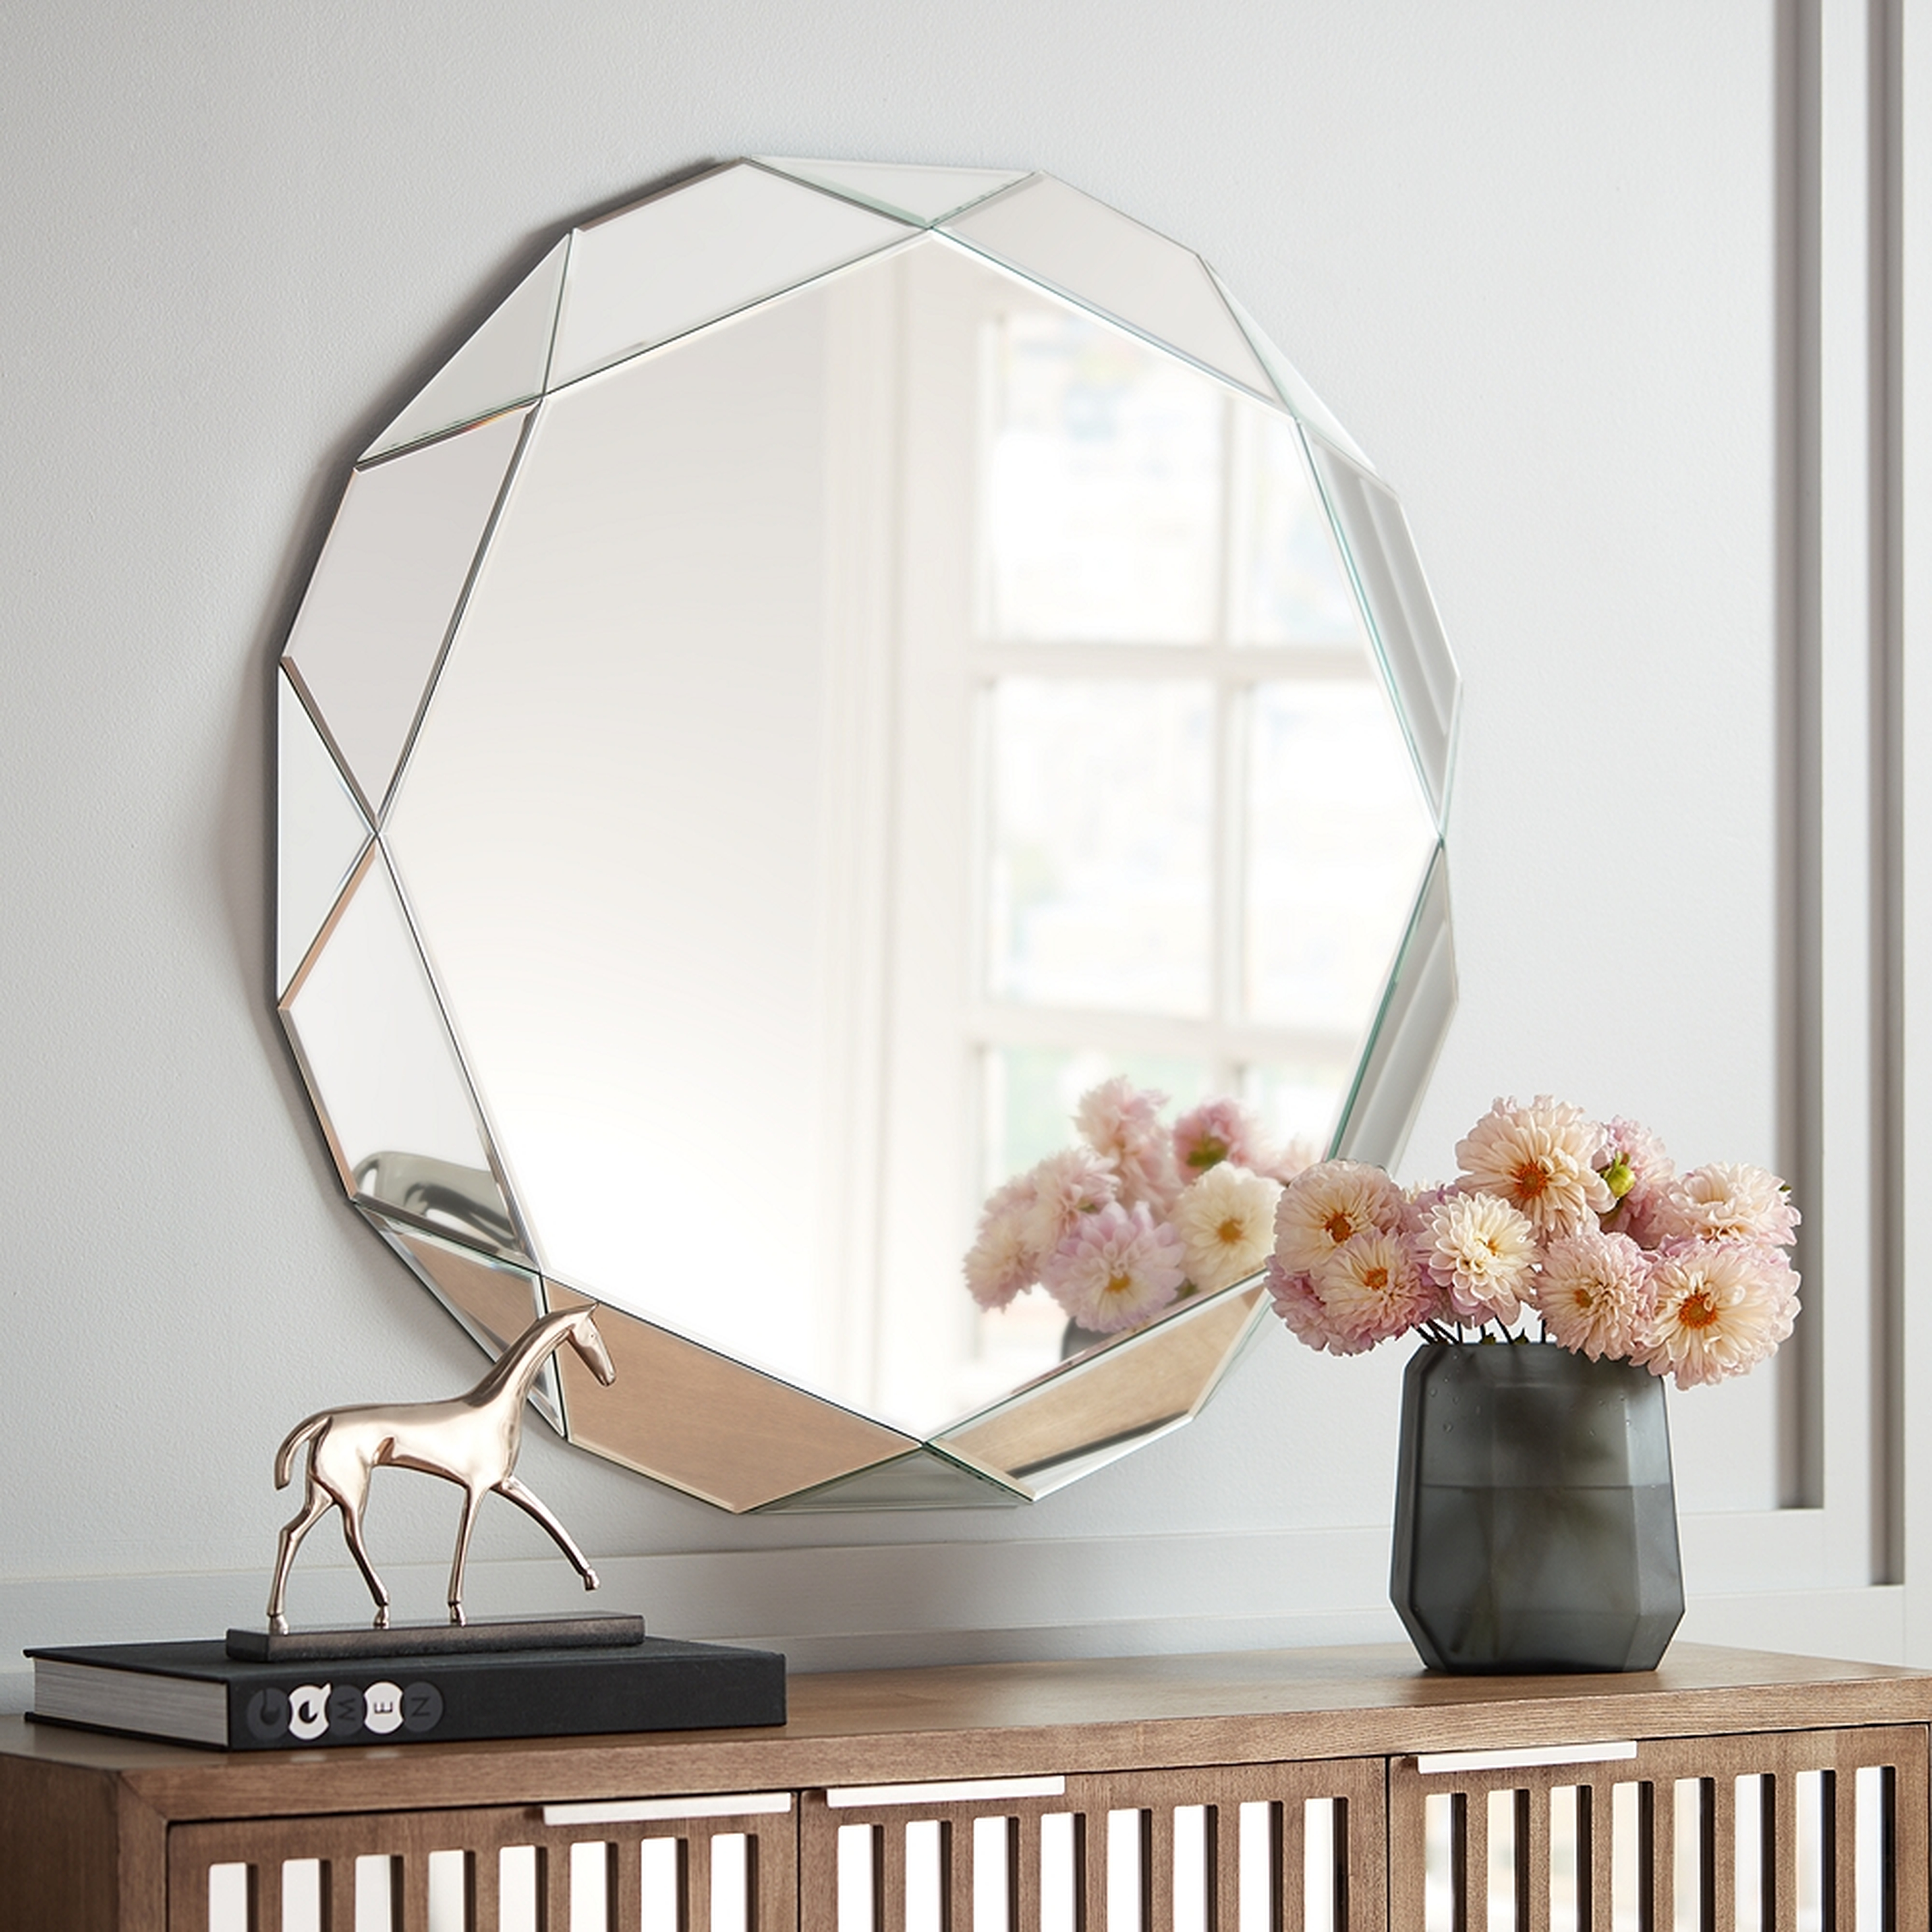 Griffin Geometric Angle Cut 33" Round Wall Mirror - Style # 24K38 - Lamps Plus